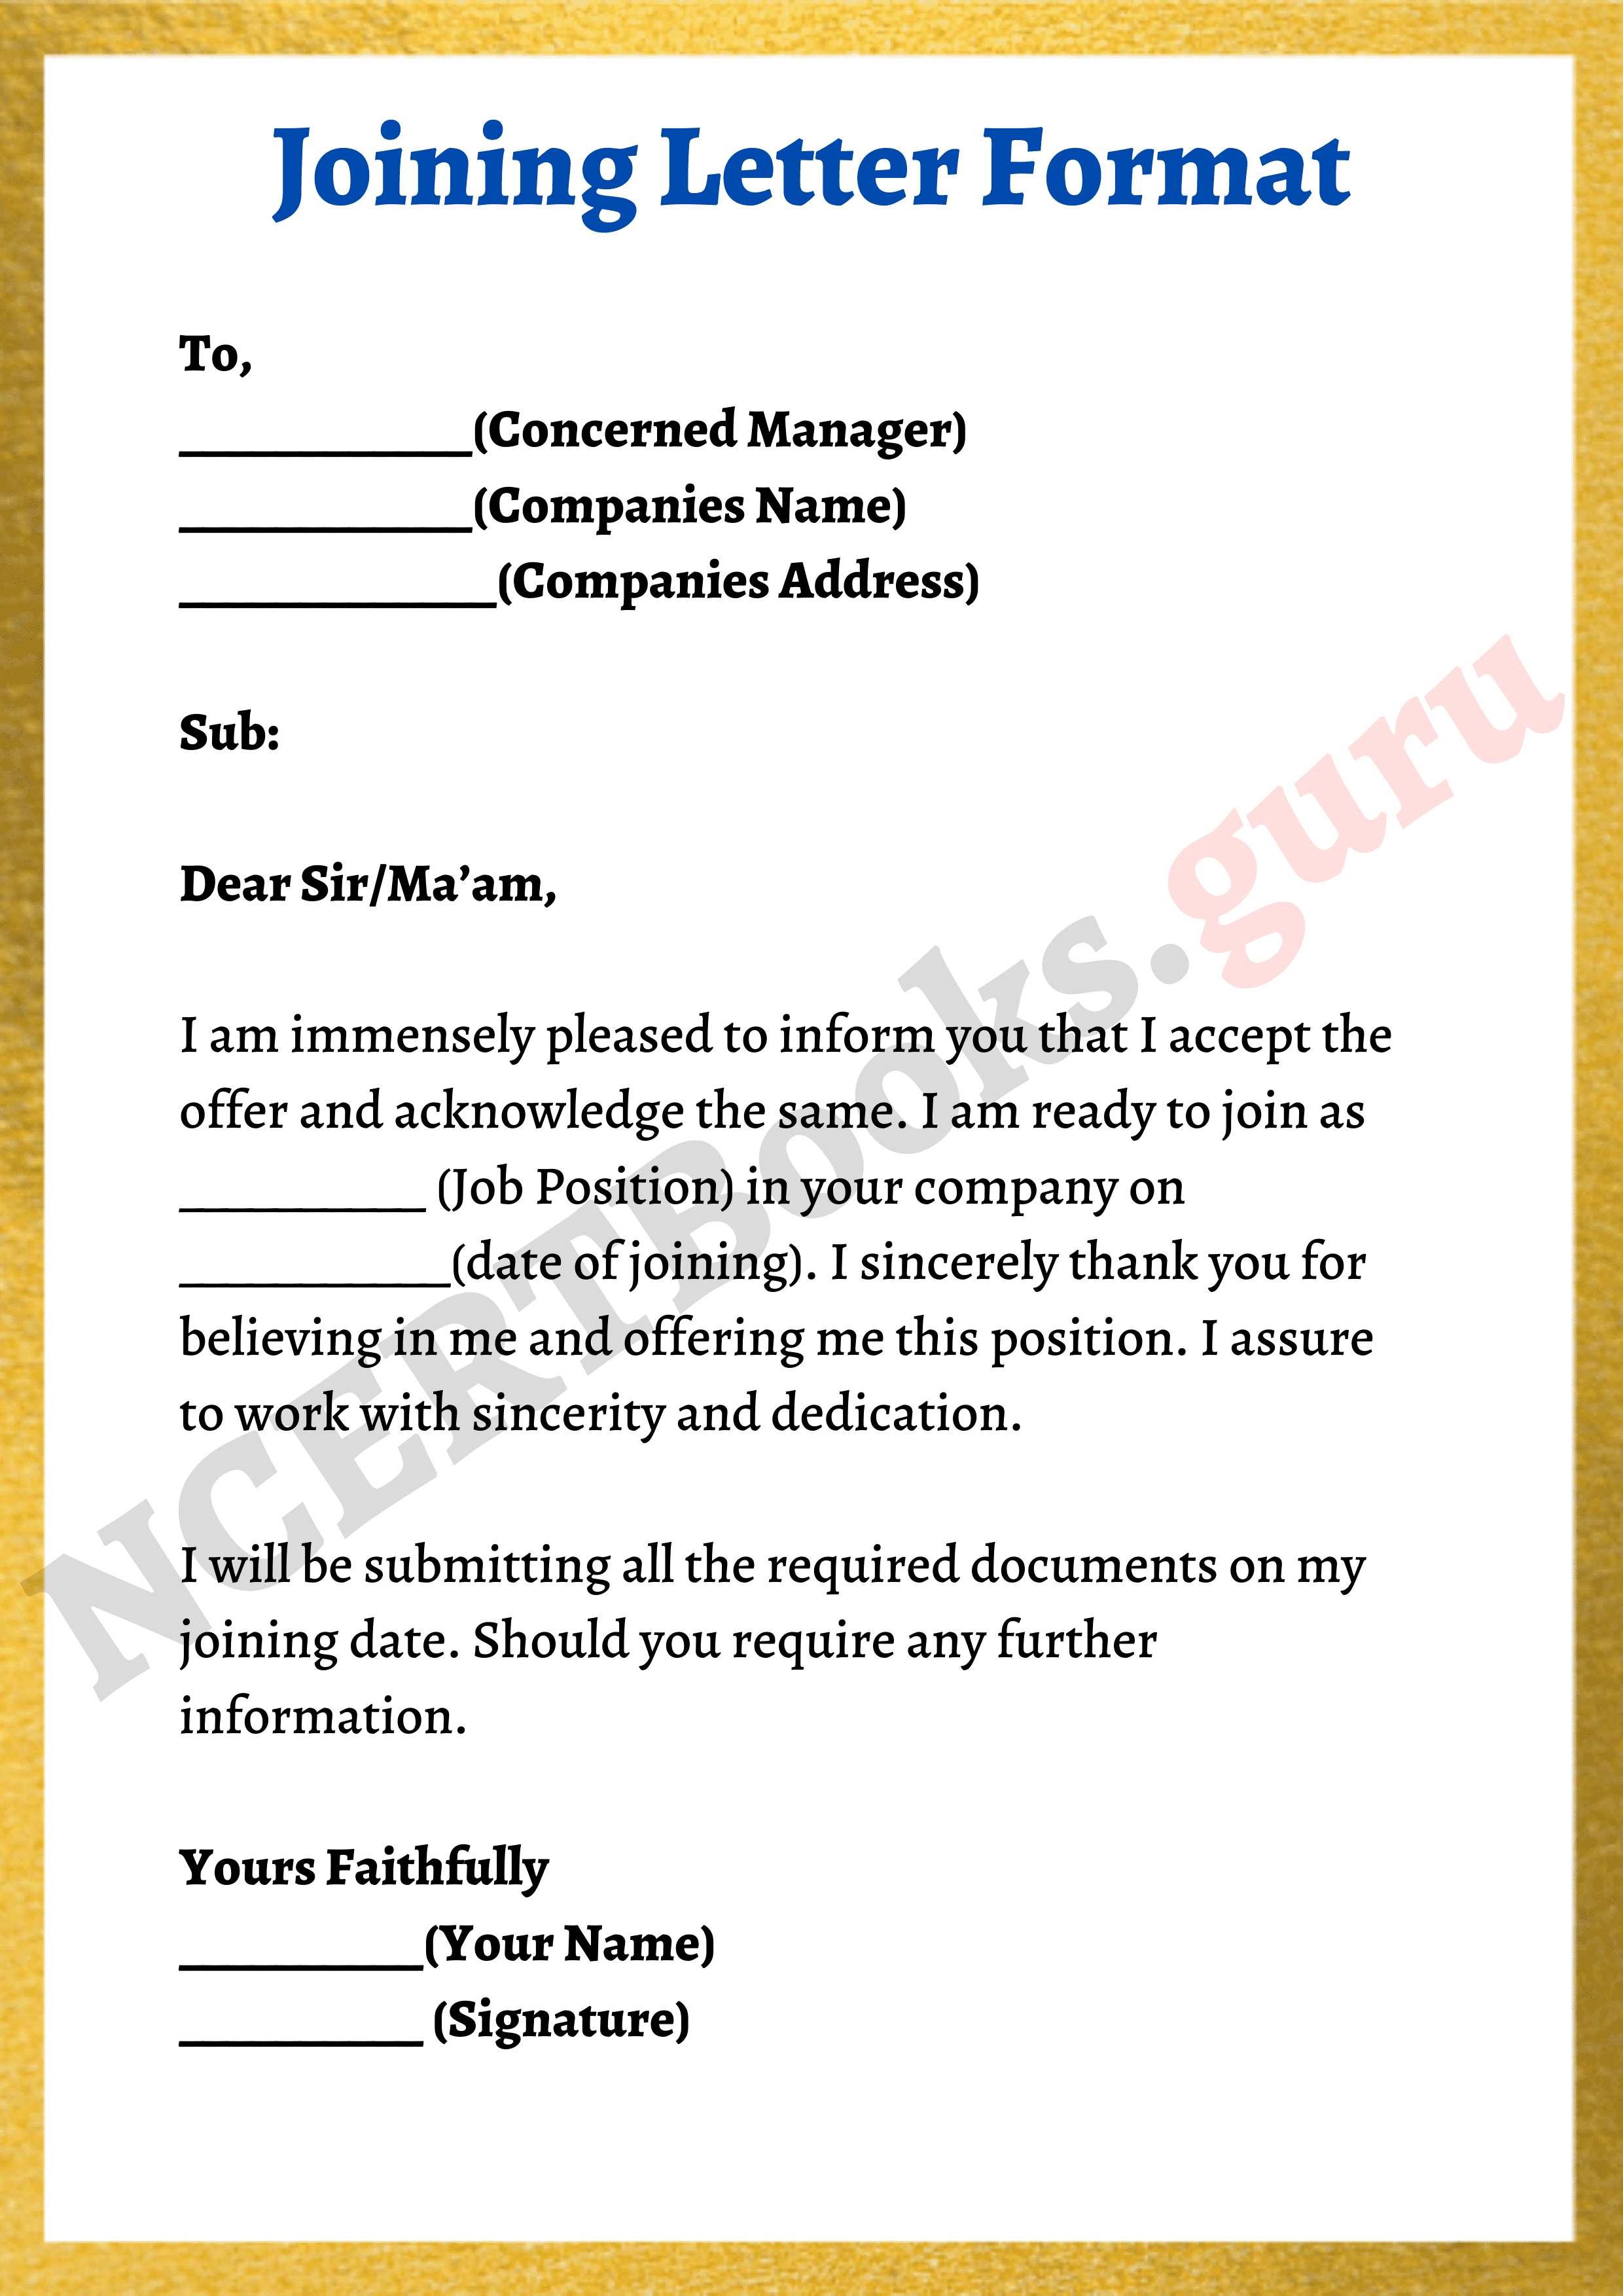 cover letter for joining a company